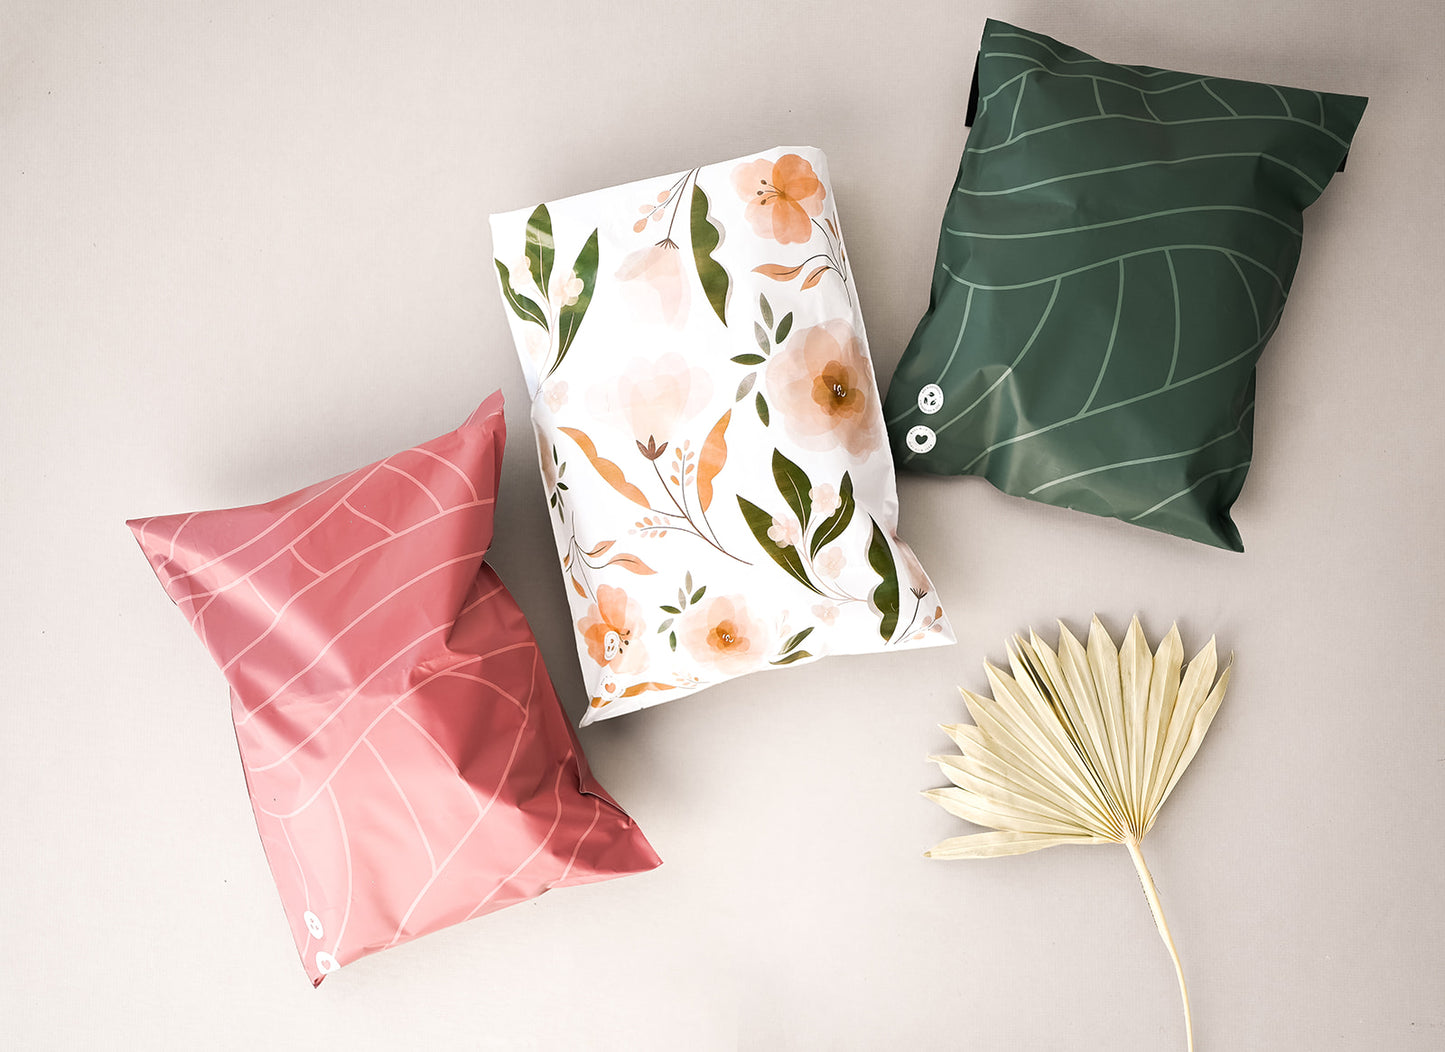 Three Olive Leaf Biodegradable Mailers 14.5" x 19" with flowers on them and a leaf next to them from impack.co.